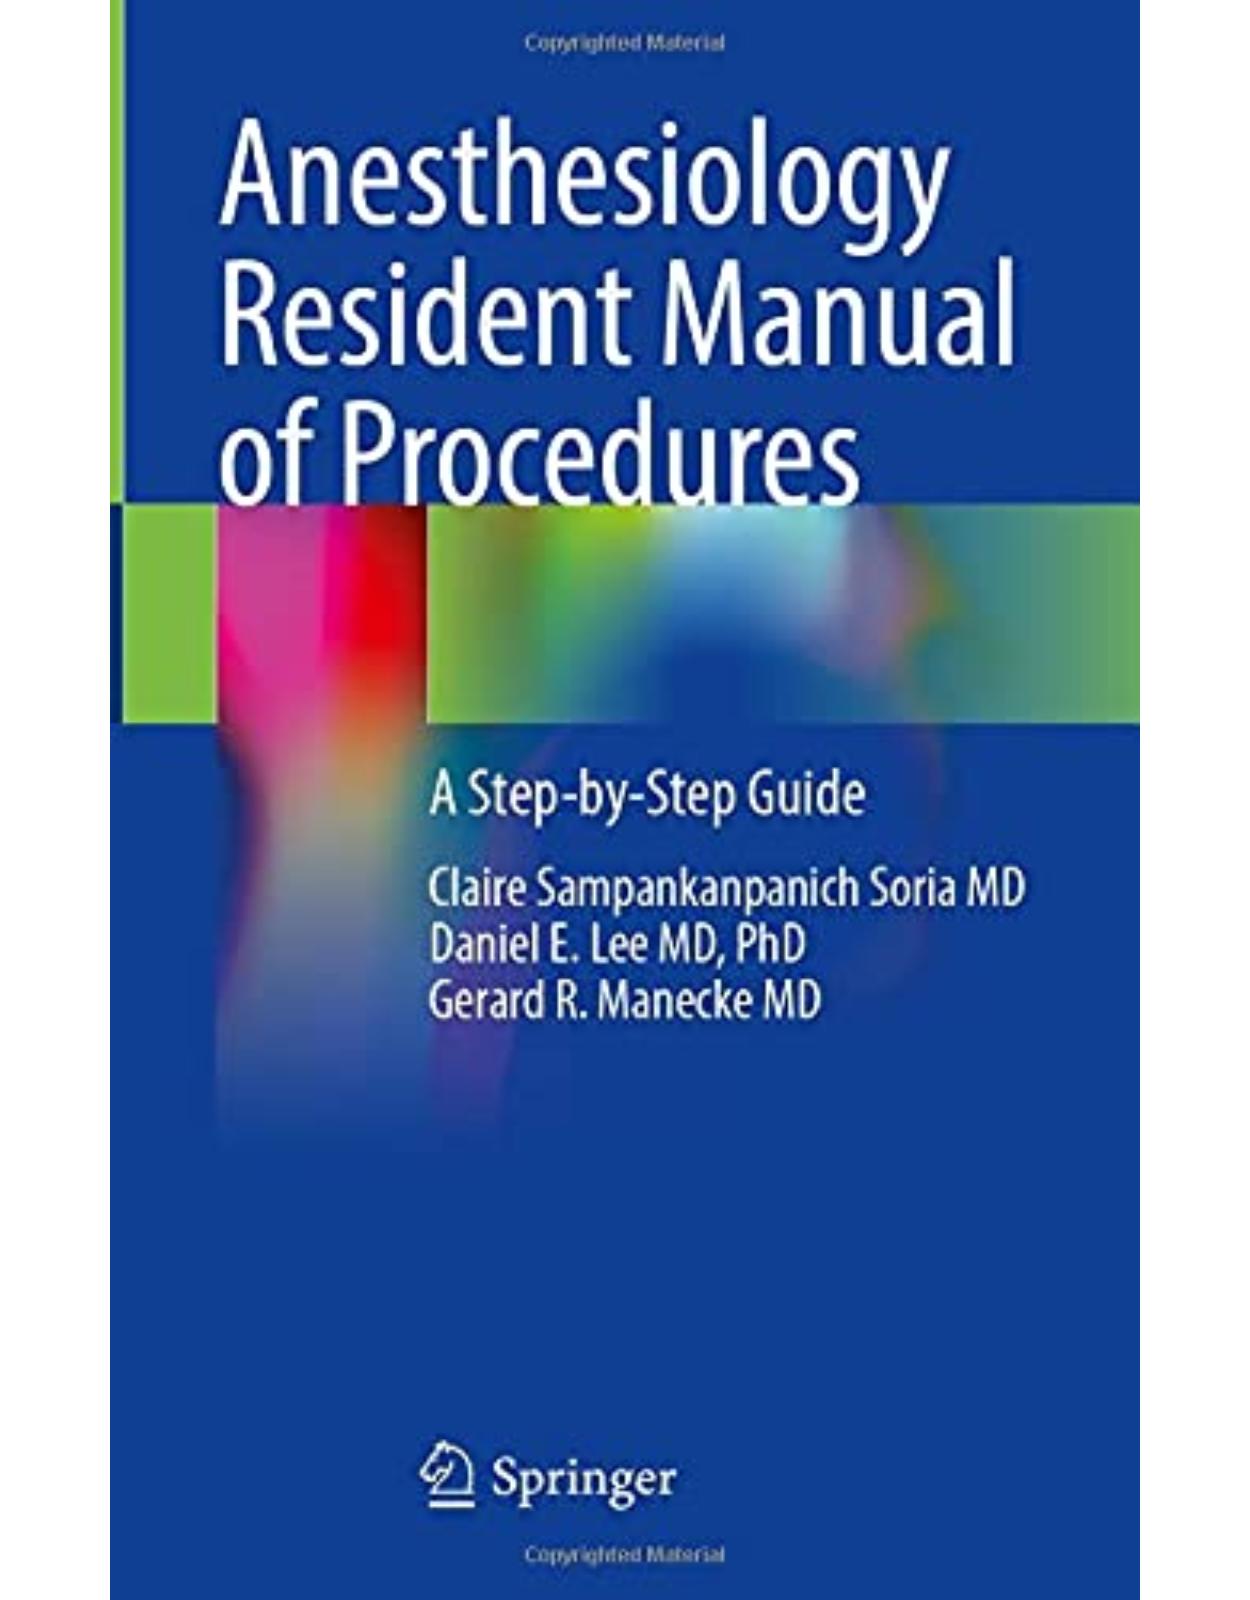 Anesthesiology Resident Manual of Procedures: A Step-by-Step Guide